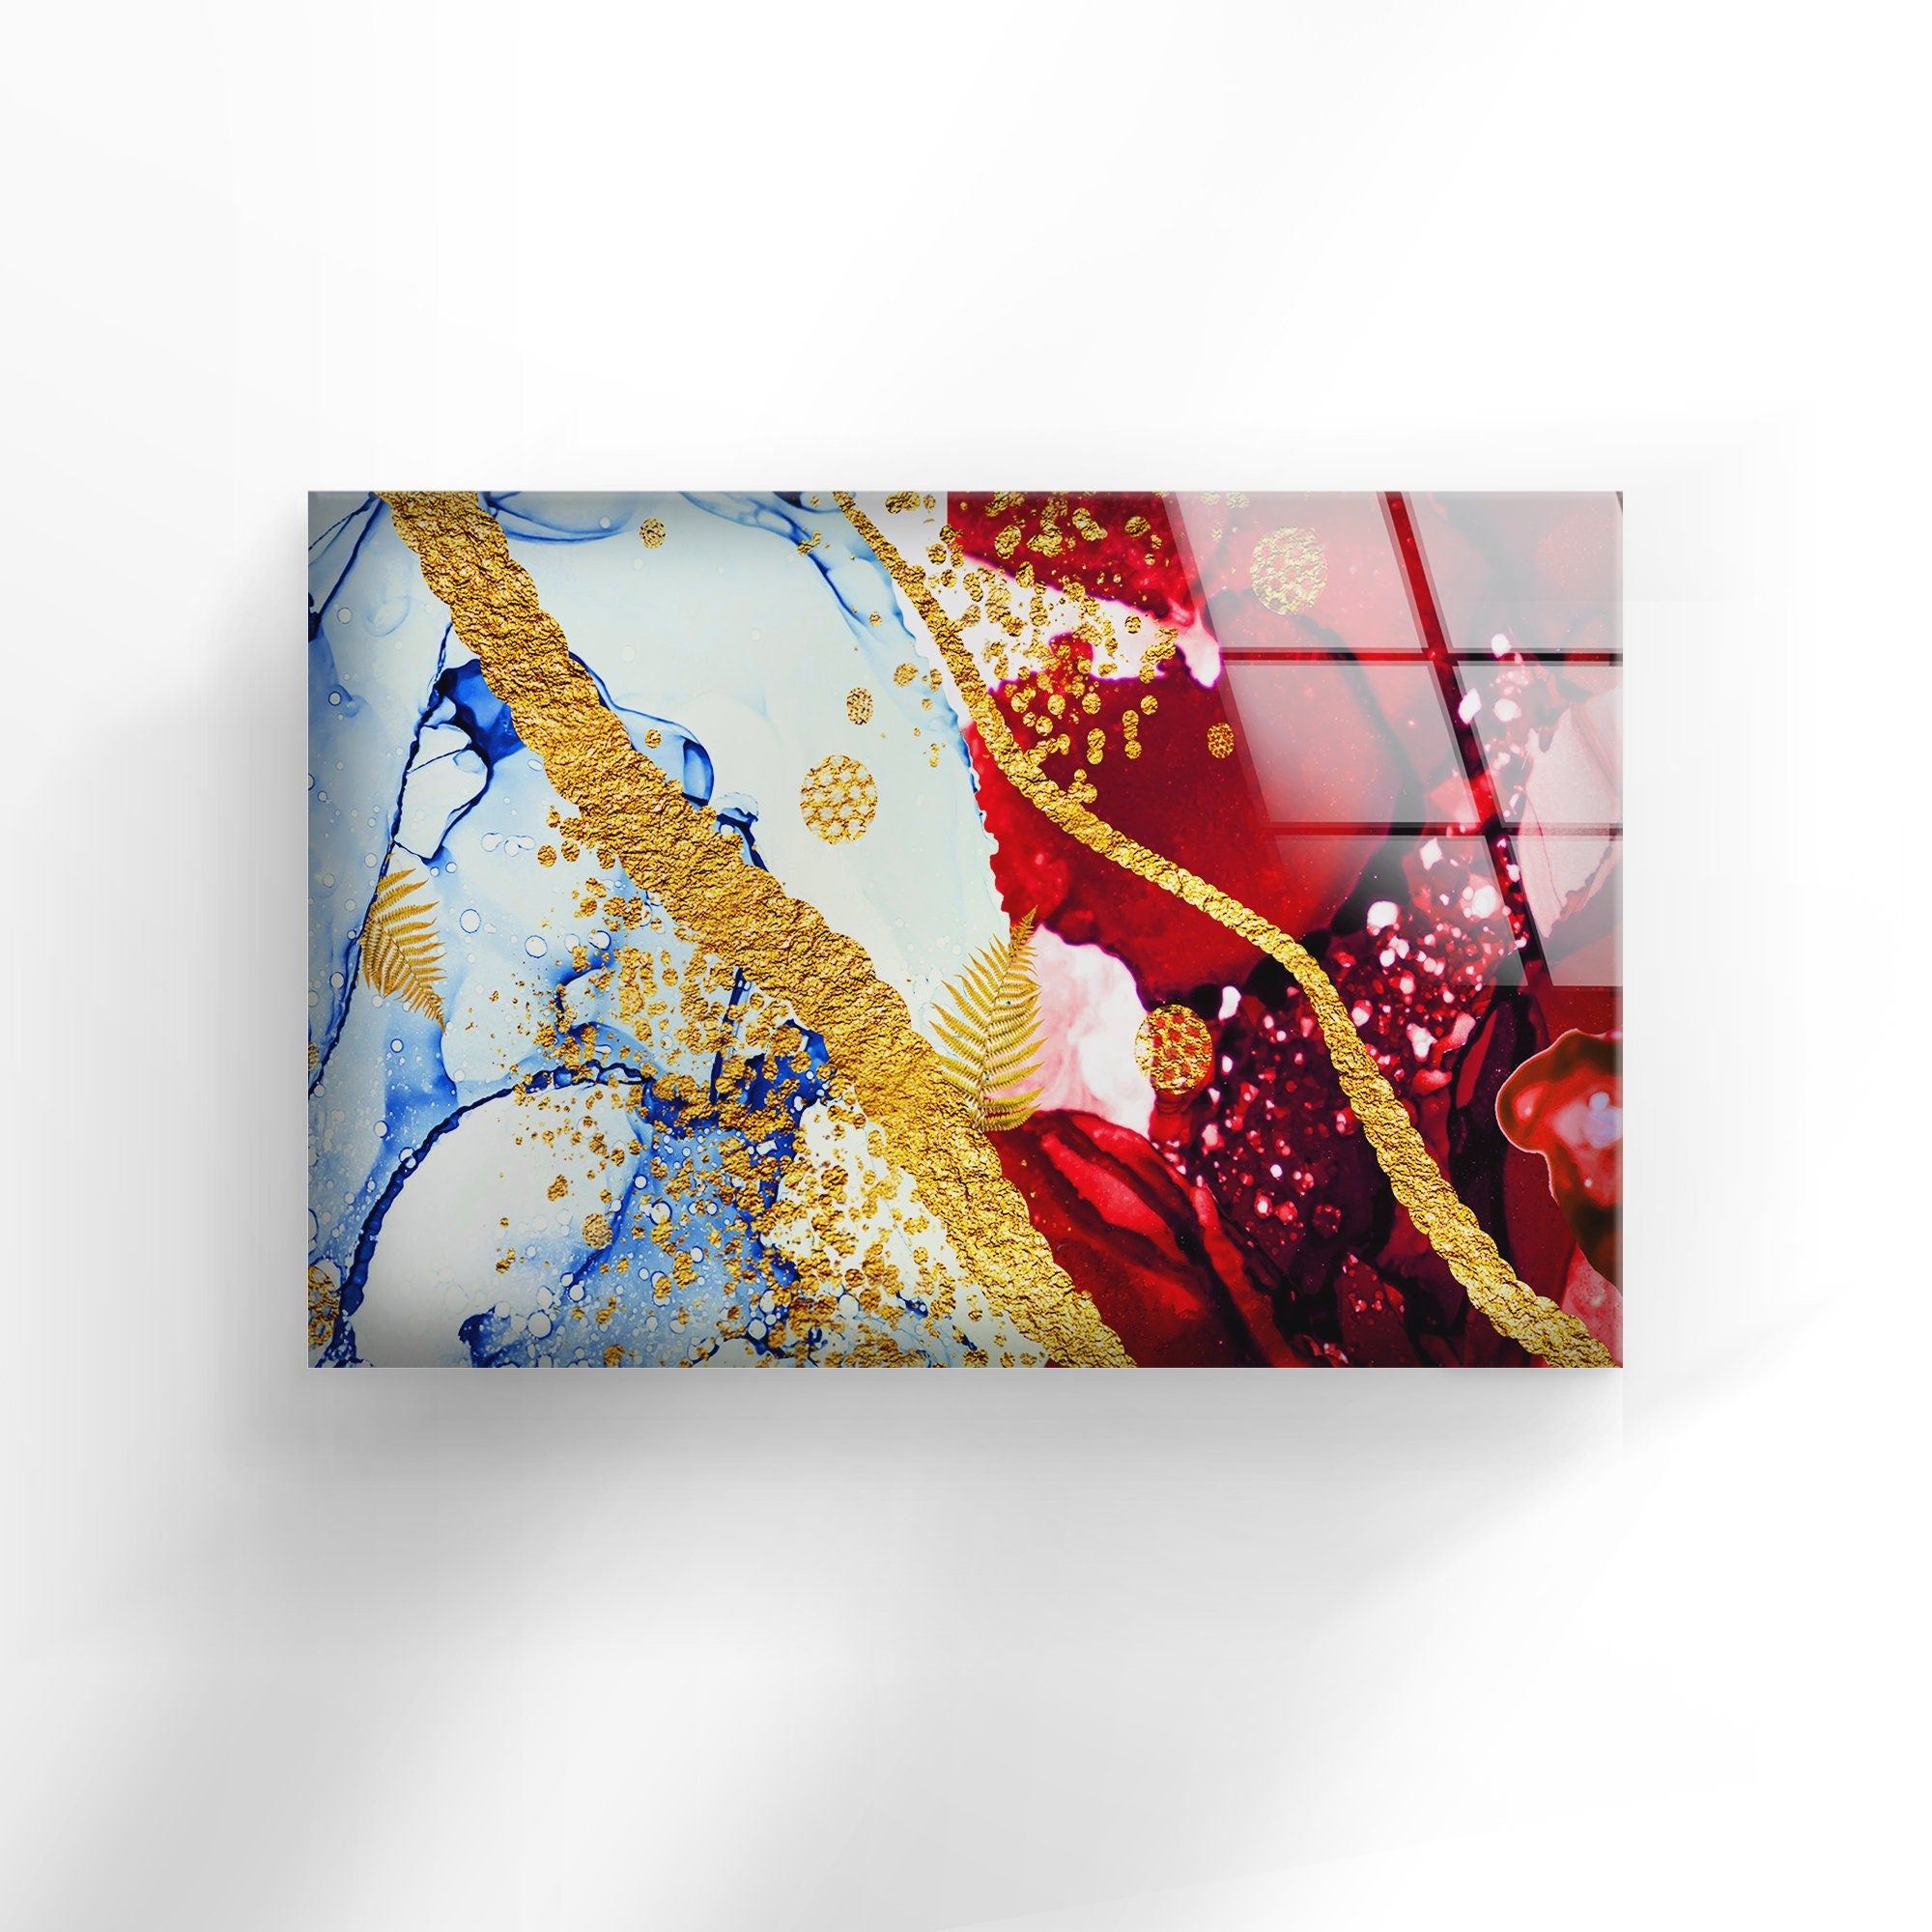 Red and Blue Abstract Tempered Glass Wall Art